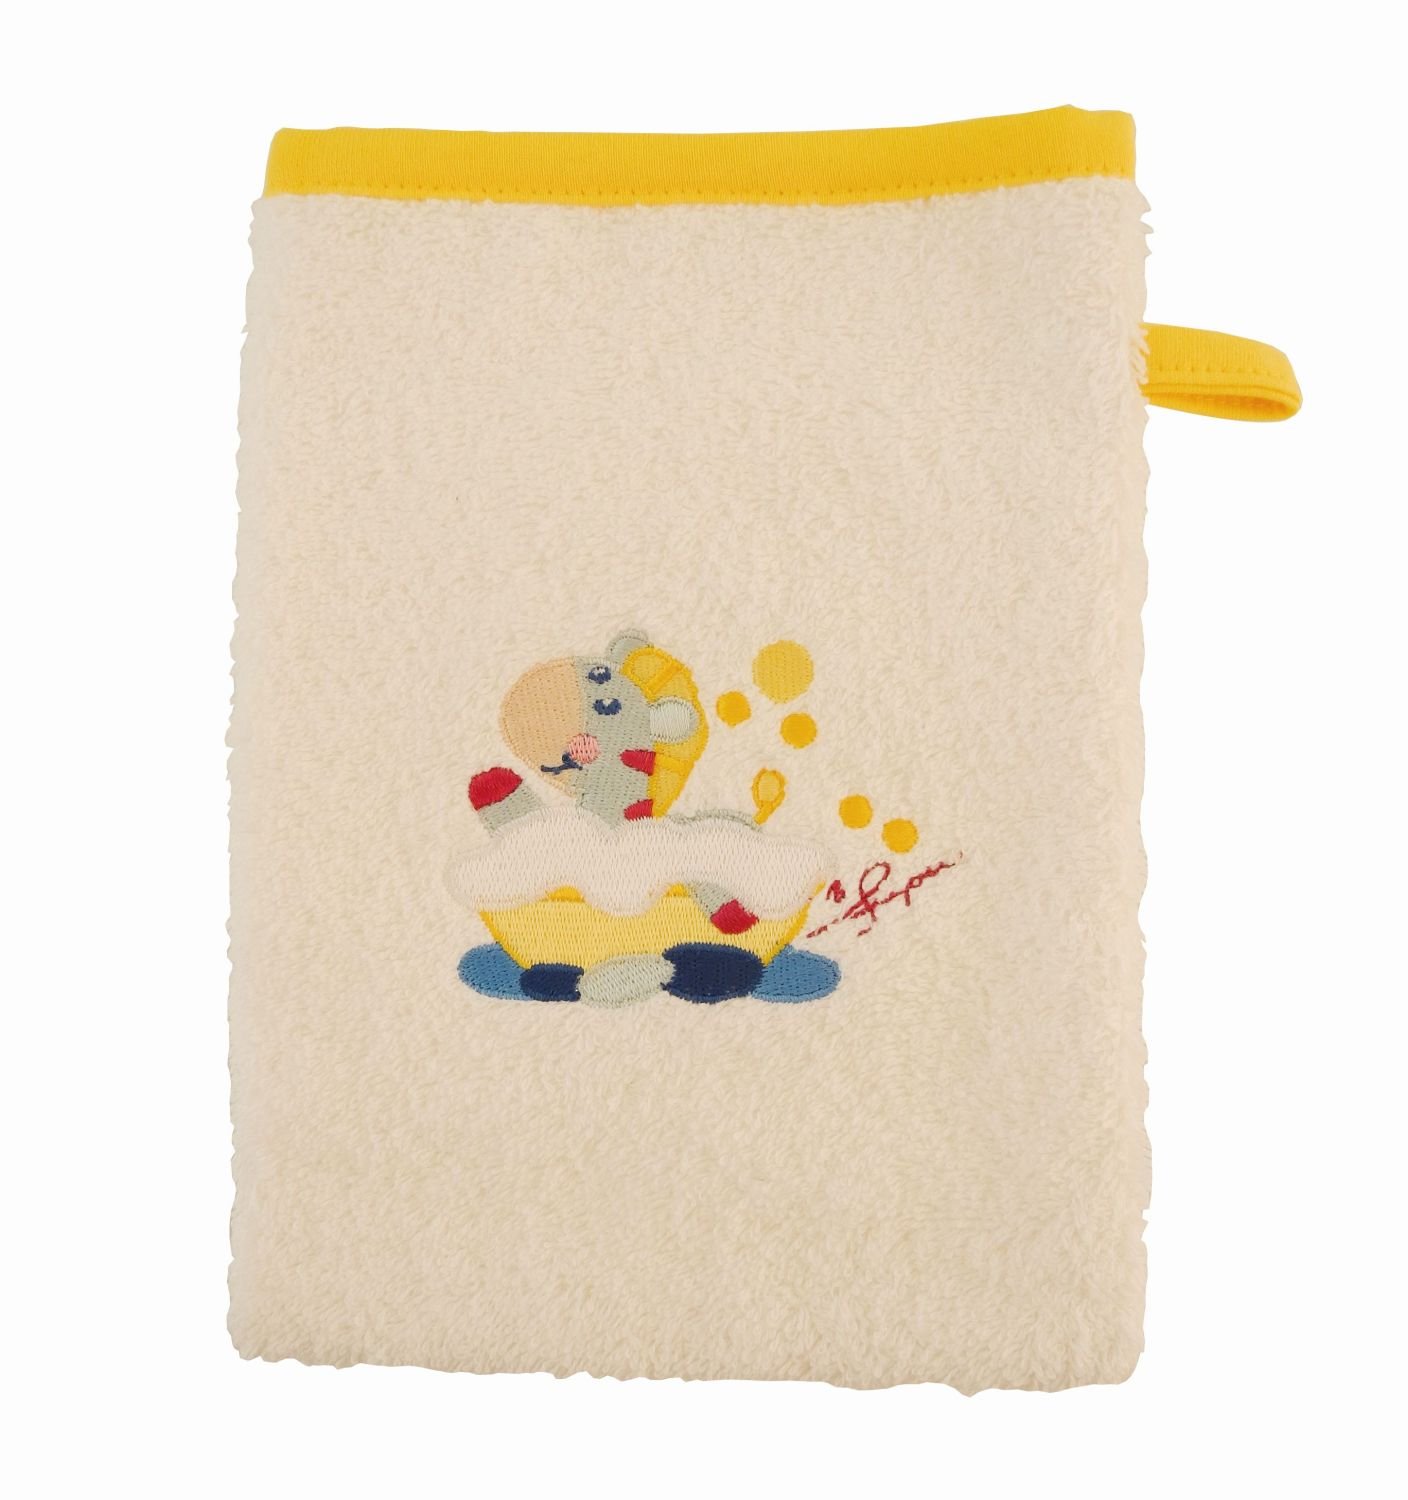 Bieco Baby Washing Glove, Beige with Rim and Motif Approximately 22 x 17, 100% Cotton yellow